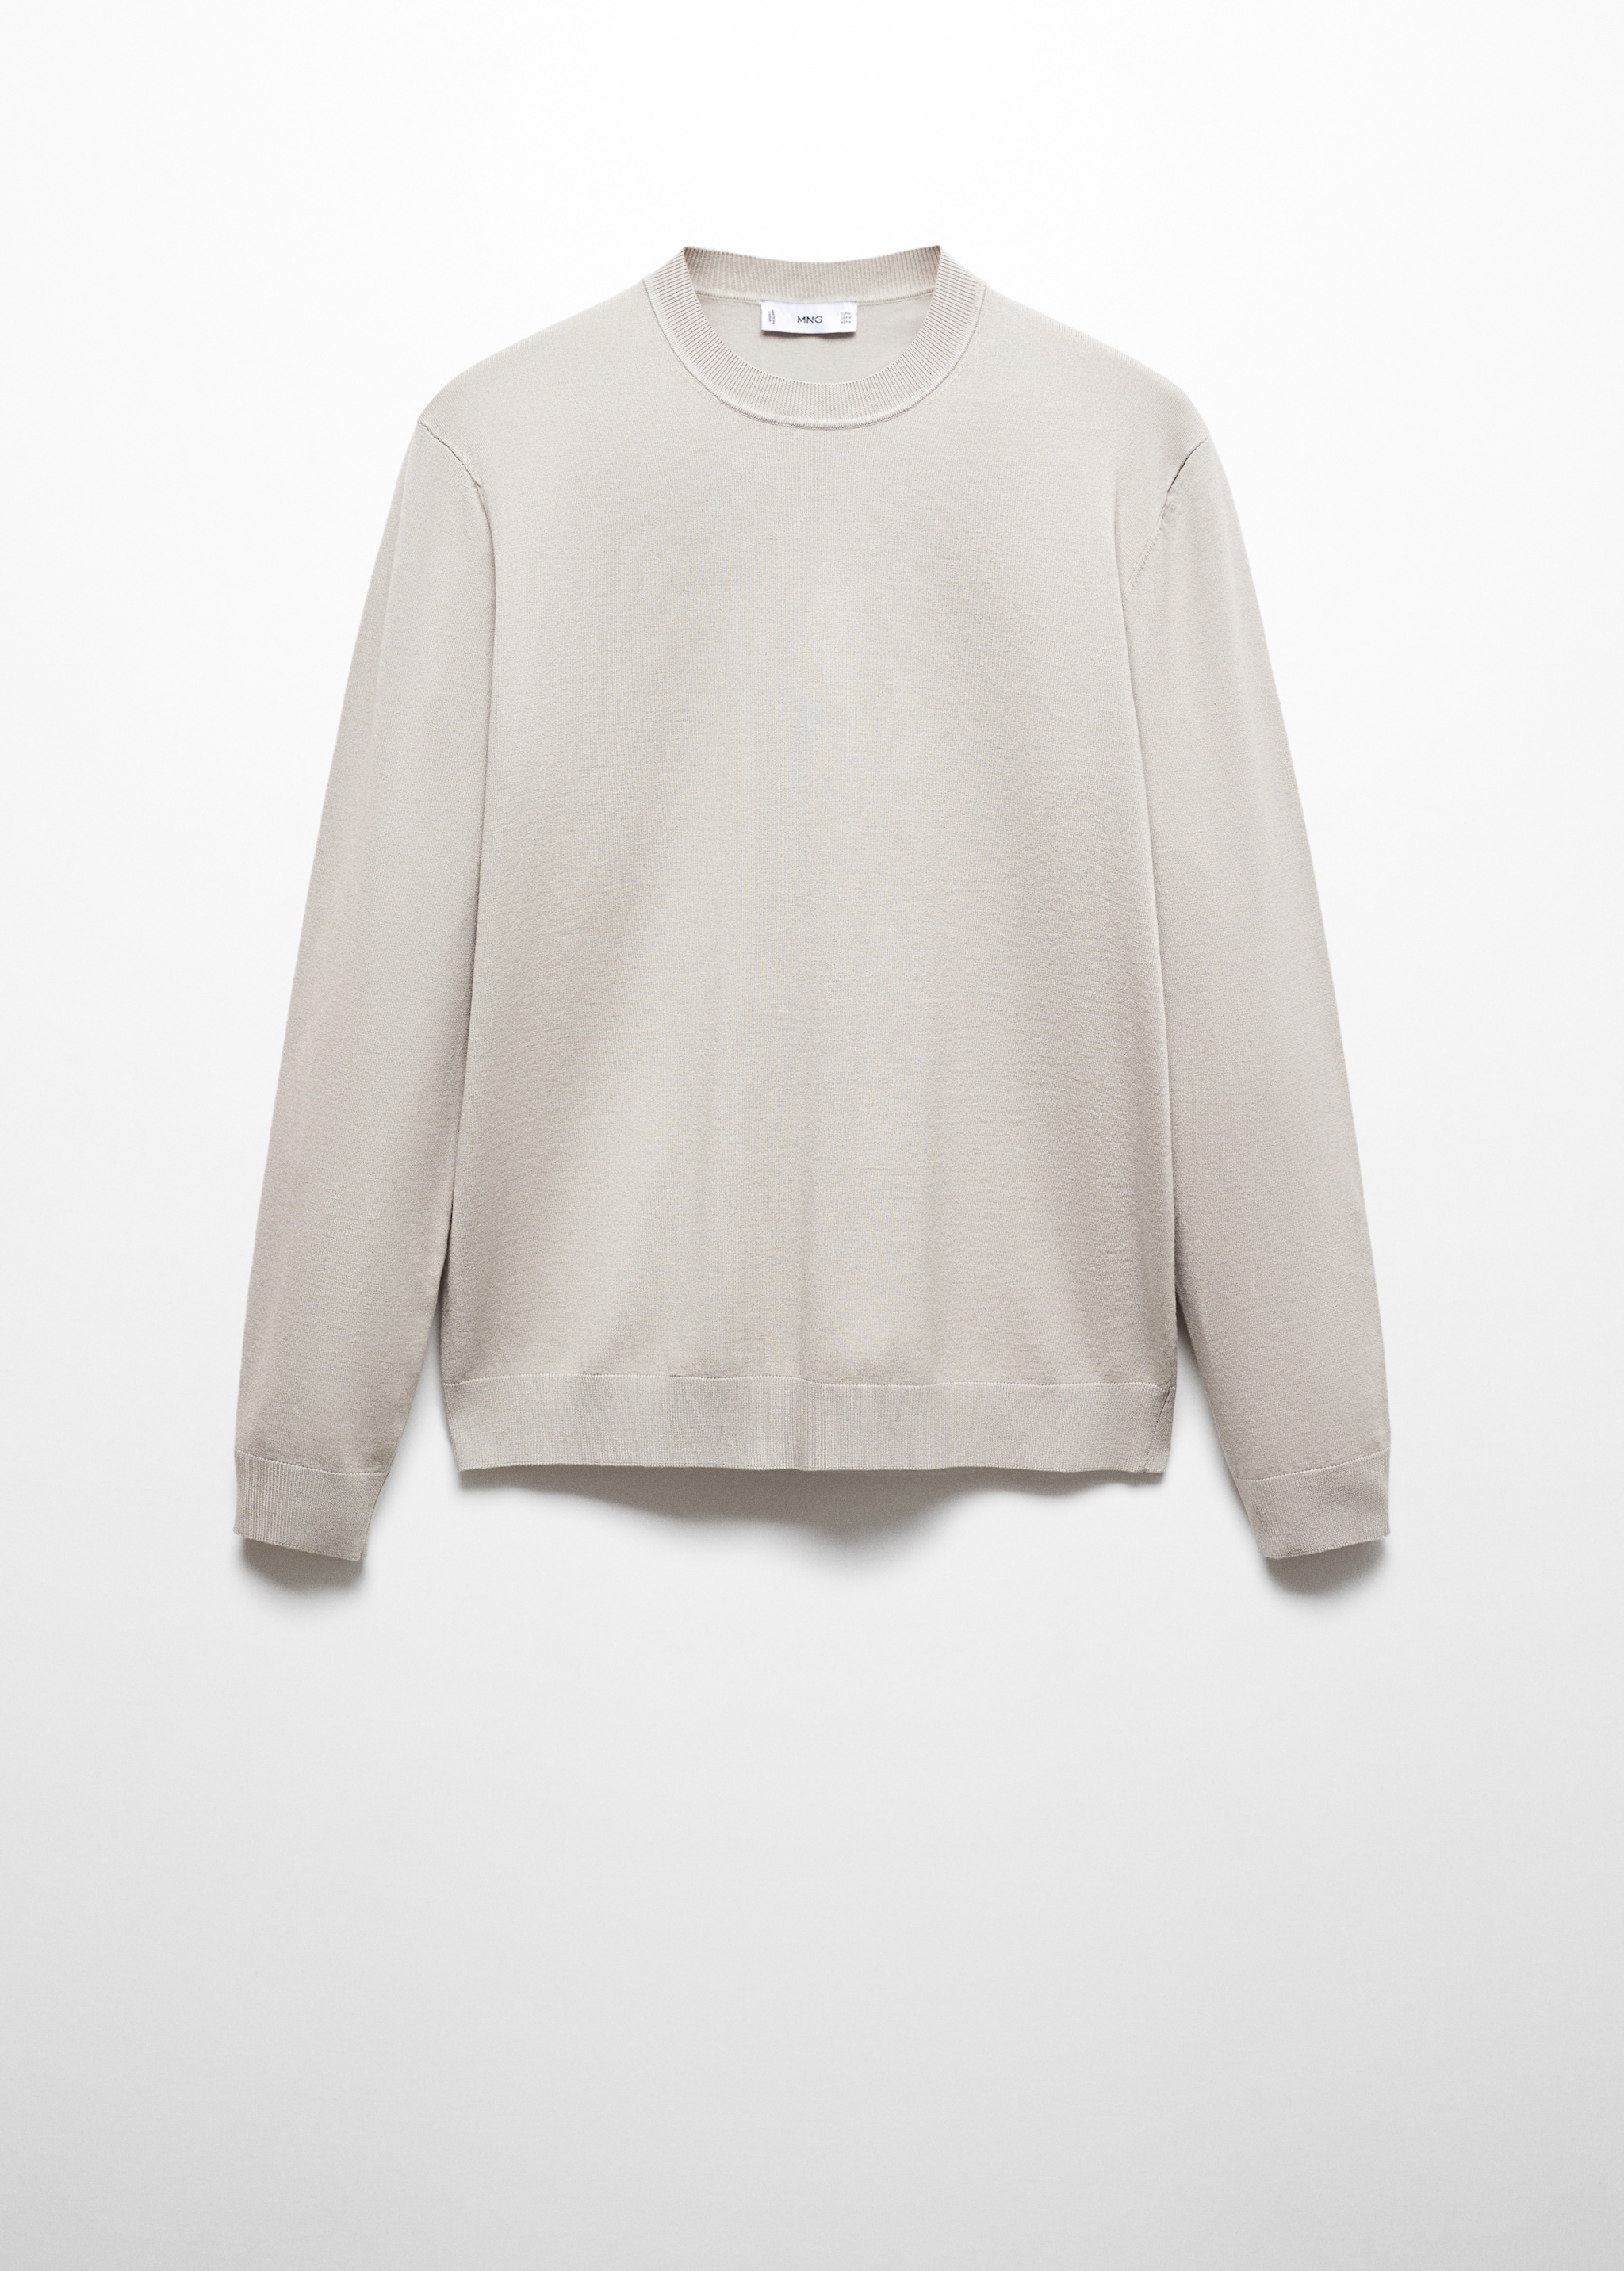 Round neck cotton knit sweater - Article without model